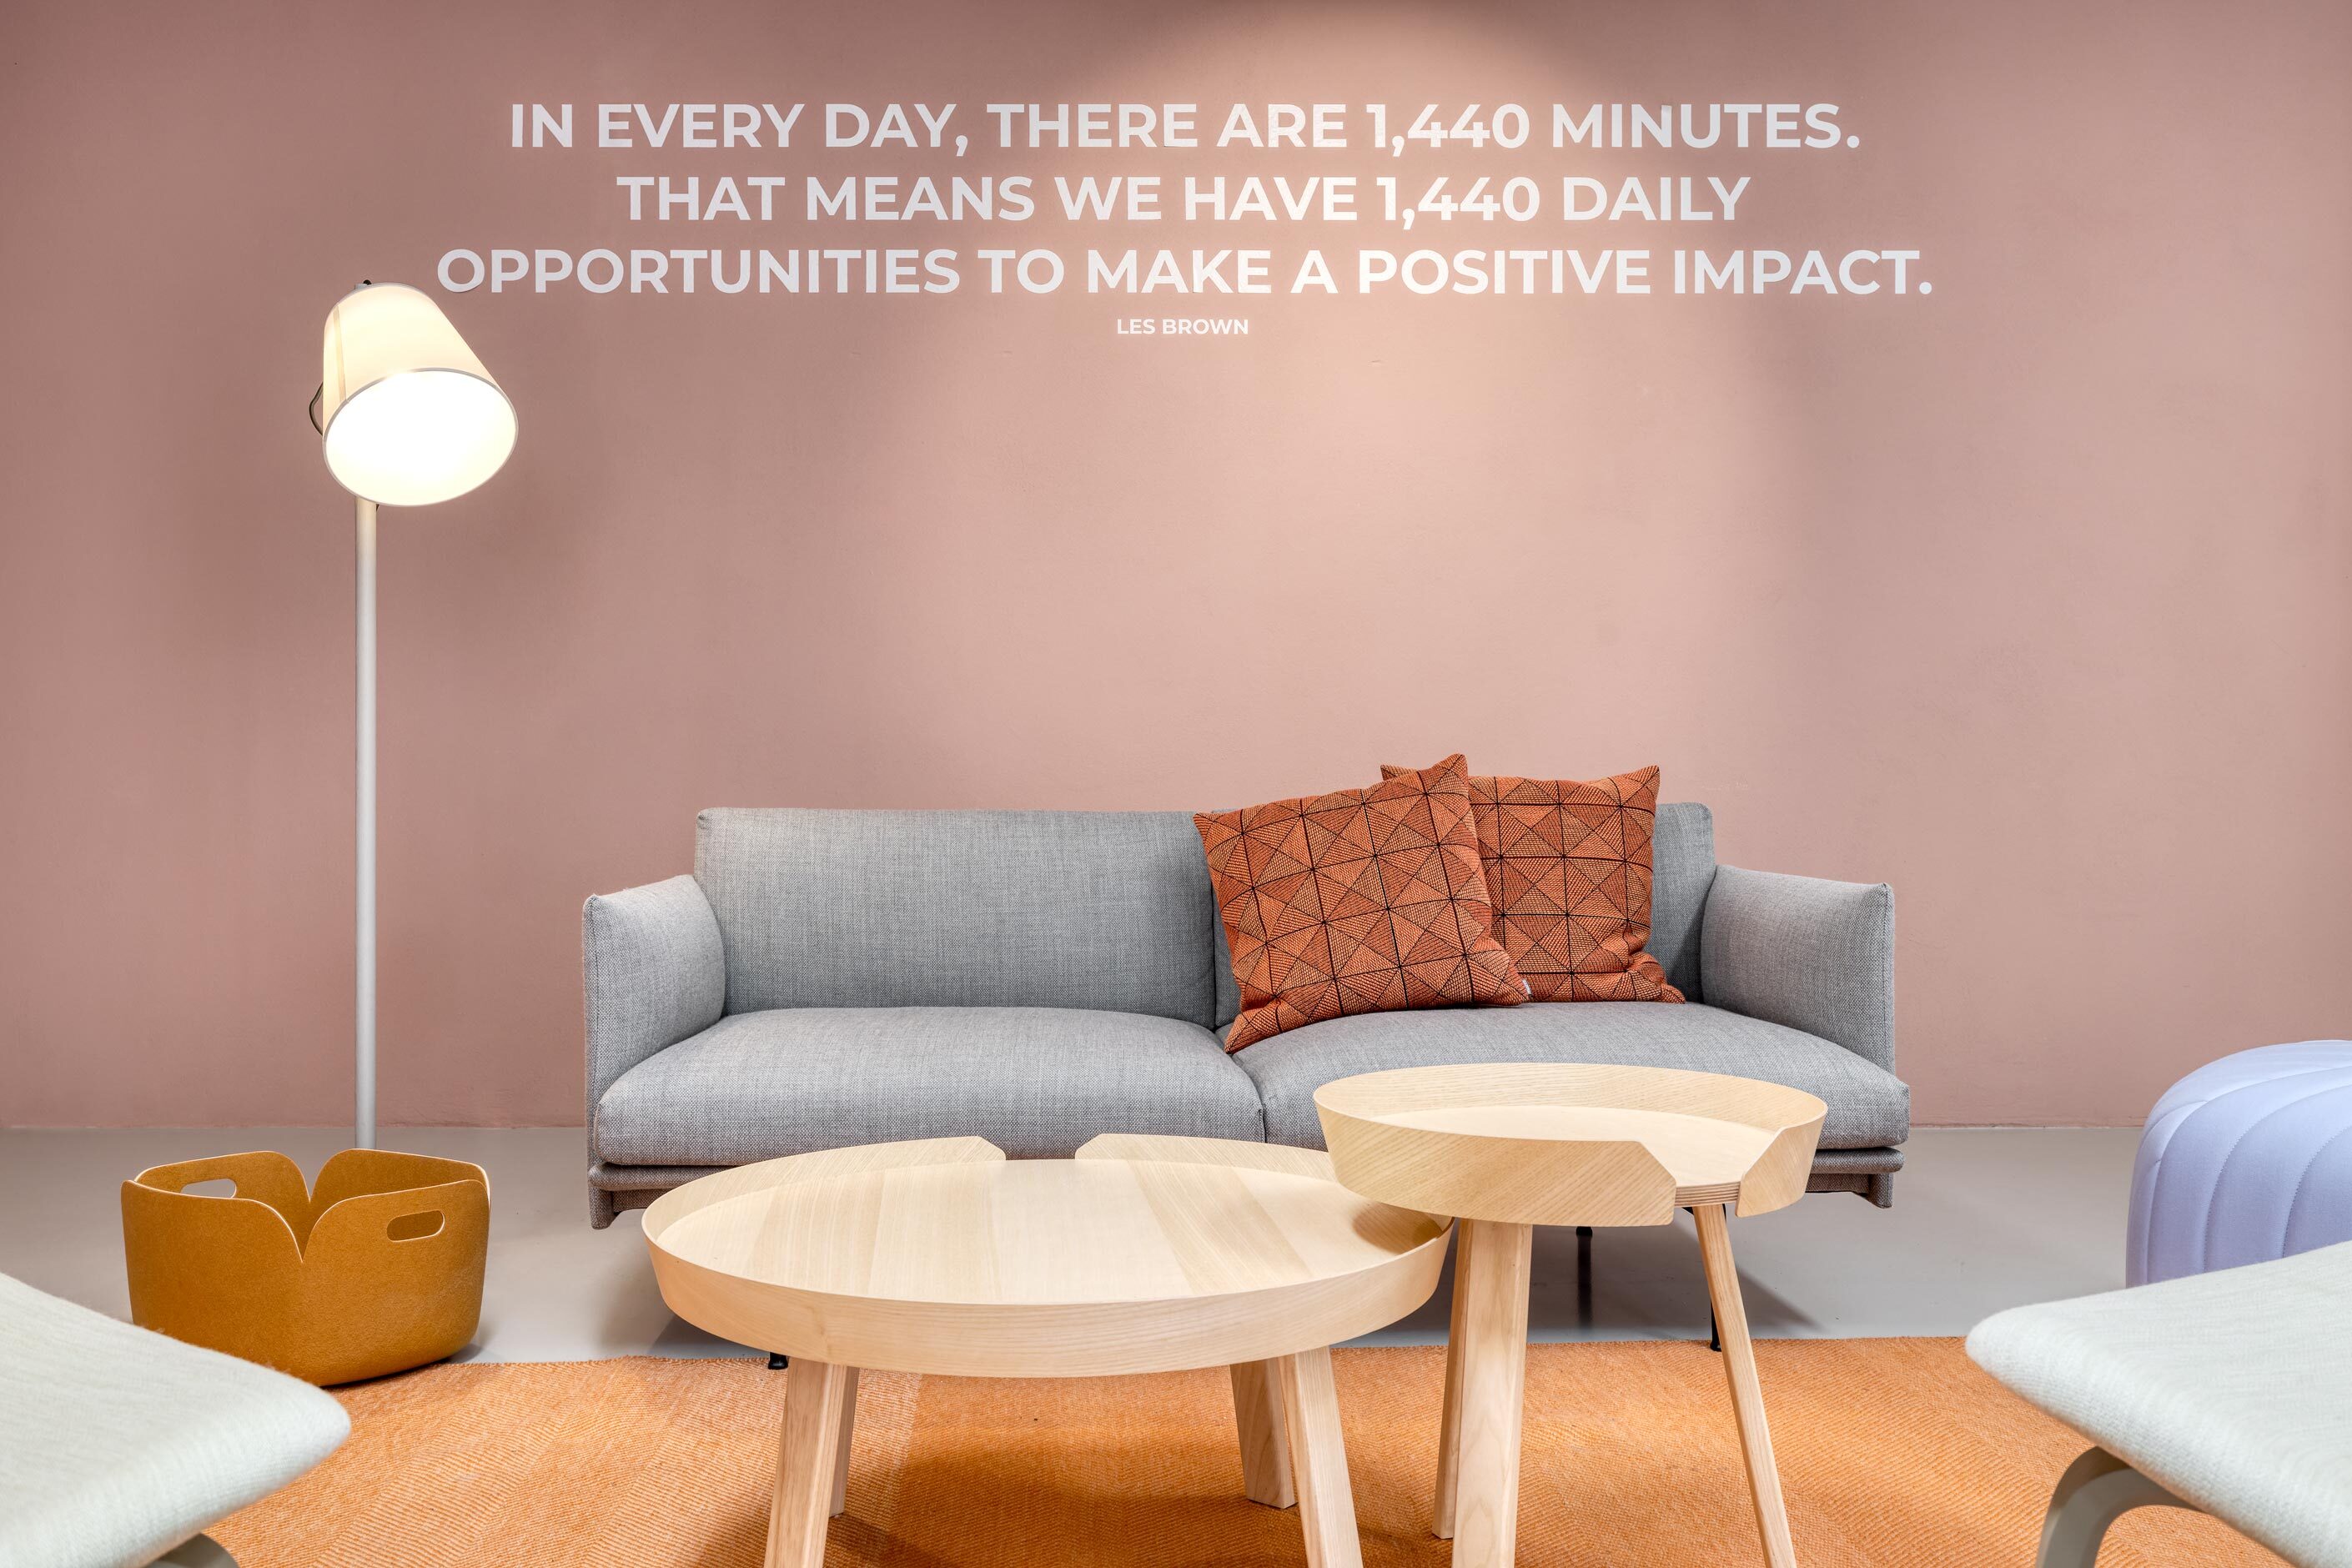 A meeting place for more social impact. The Workspace was planned and furnished by feco and its brand partner Muuto